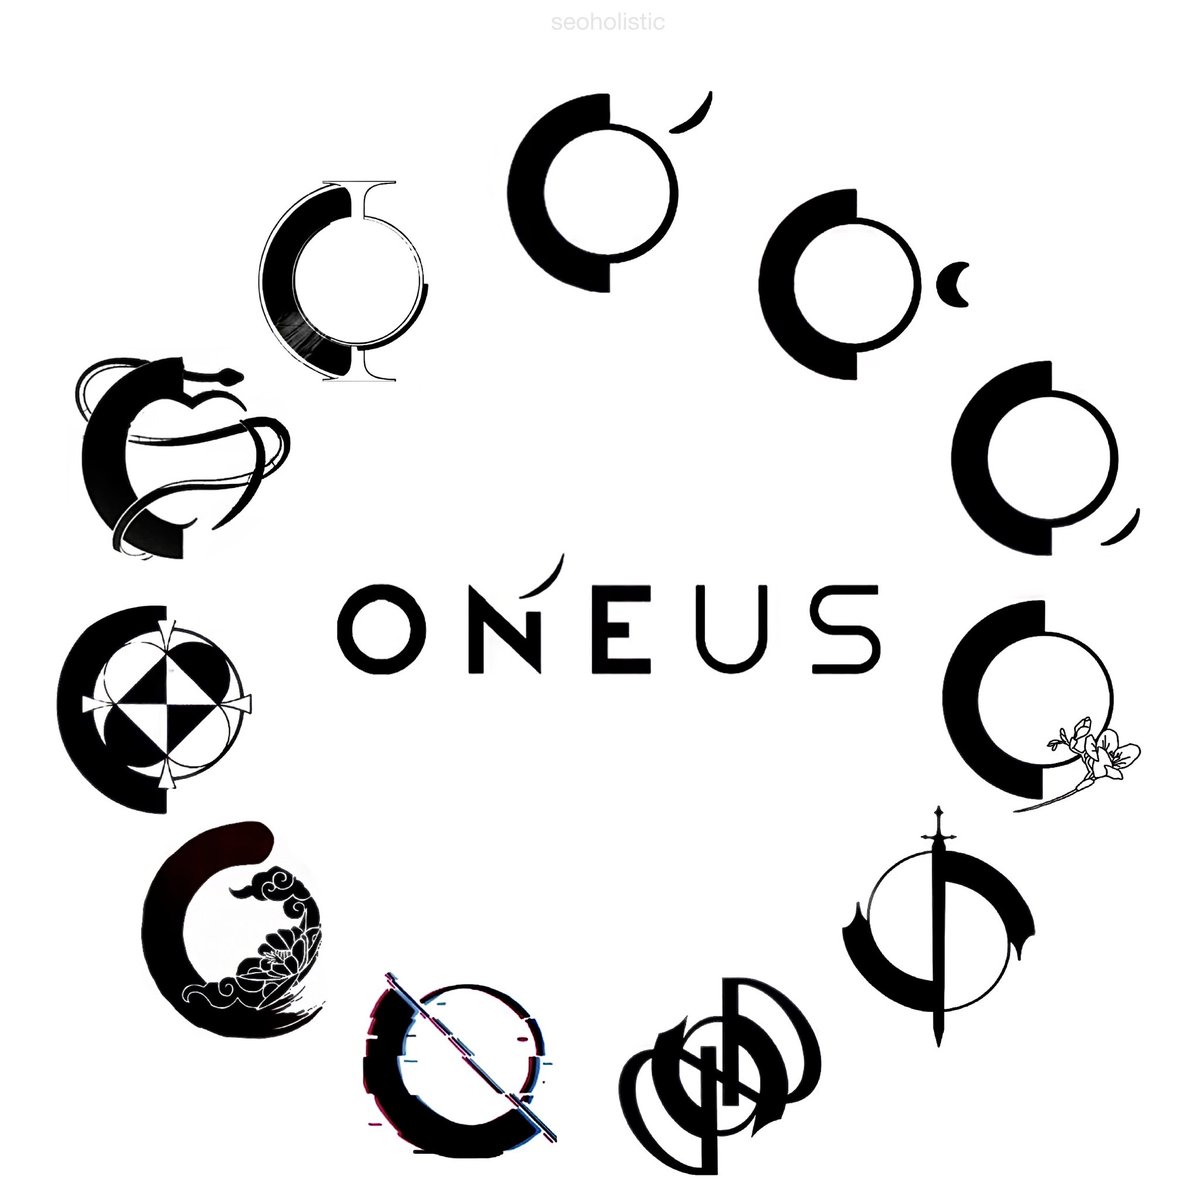 evolution of #oneus’ logo over the years 🌎